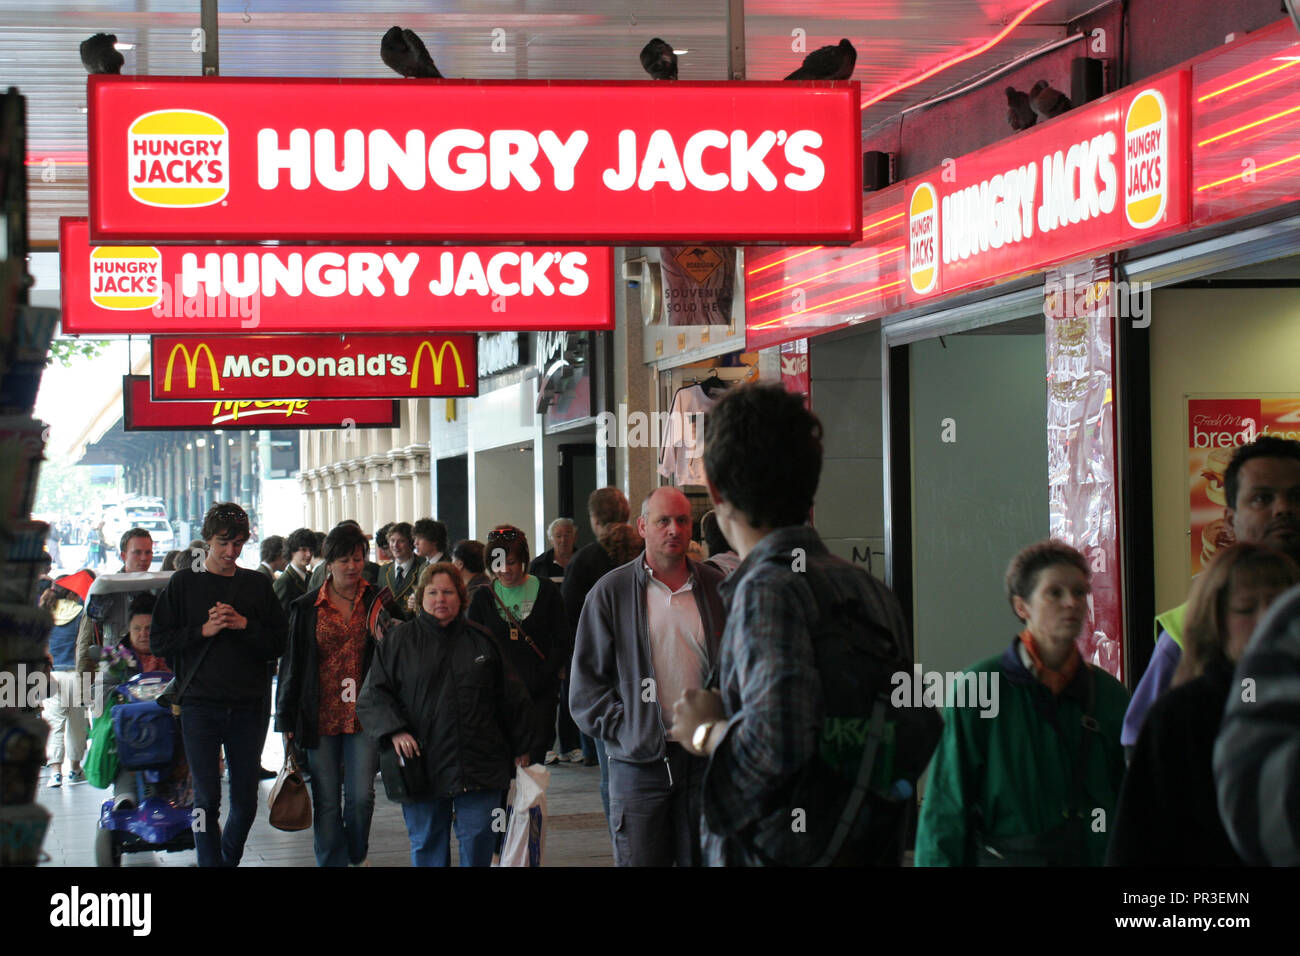 CROWDS WALK UNDER HUNGRY JACKS AND MCDONALD'S SIGNS IN SWANSTON STREET, MELBOURNE, VICTORIA, AUSTRALIA Stock Photo